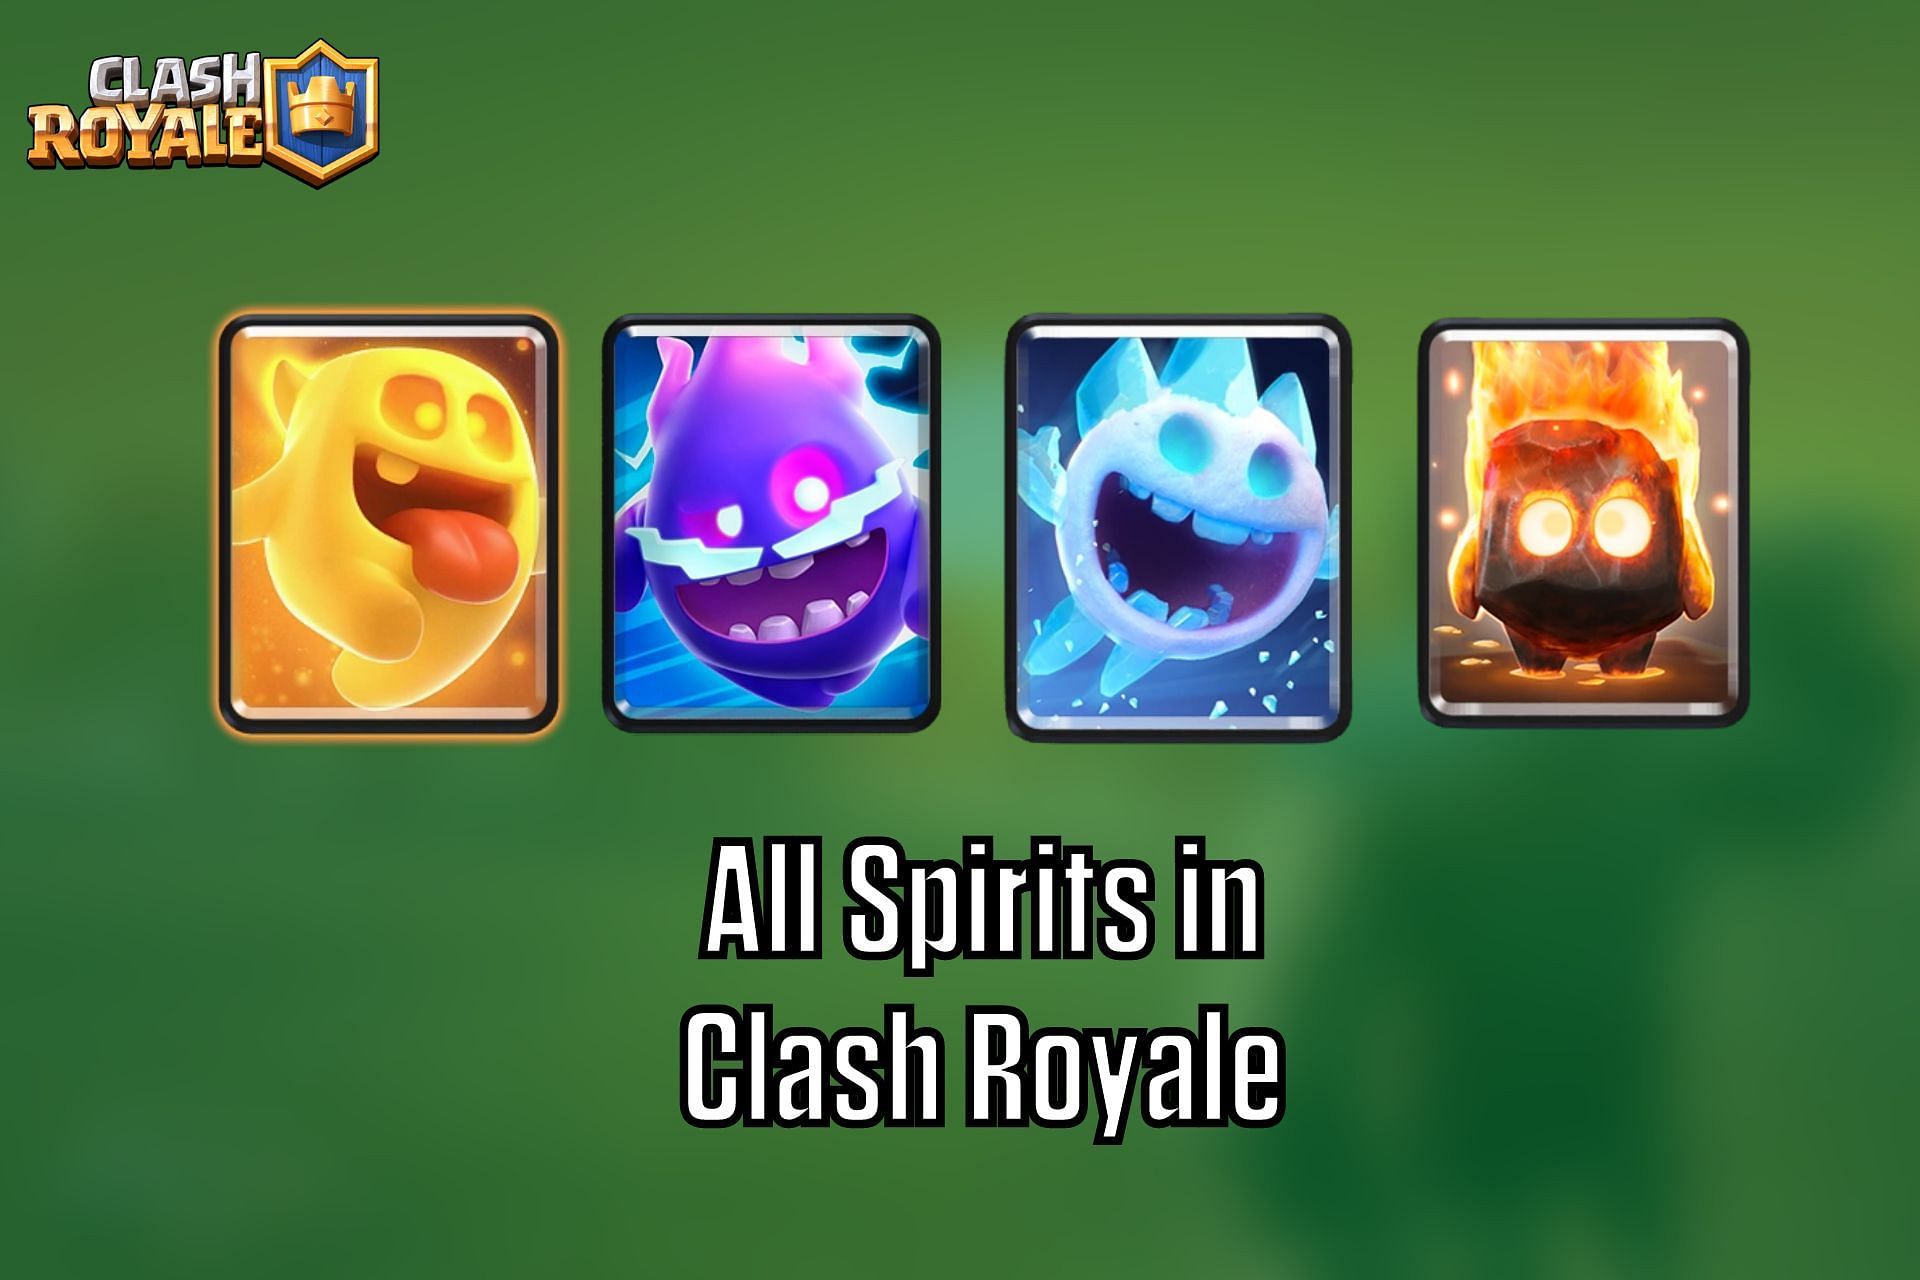 What are Spirits in Clash Royale?